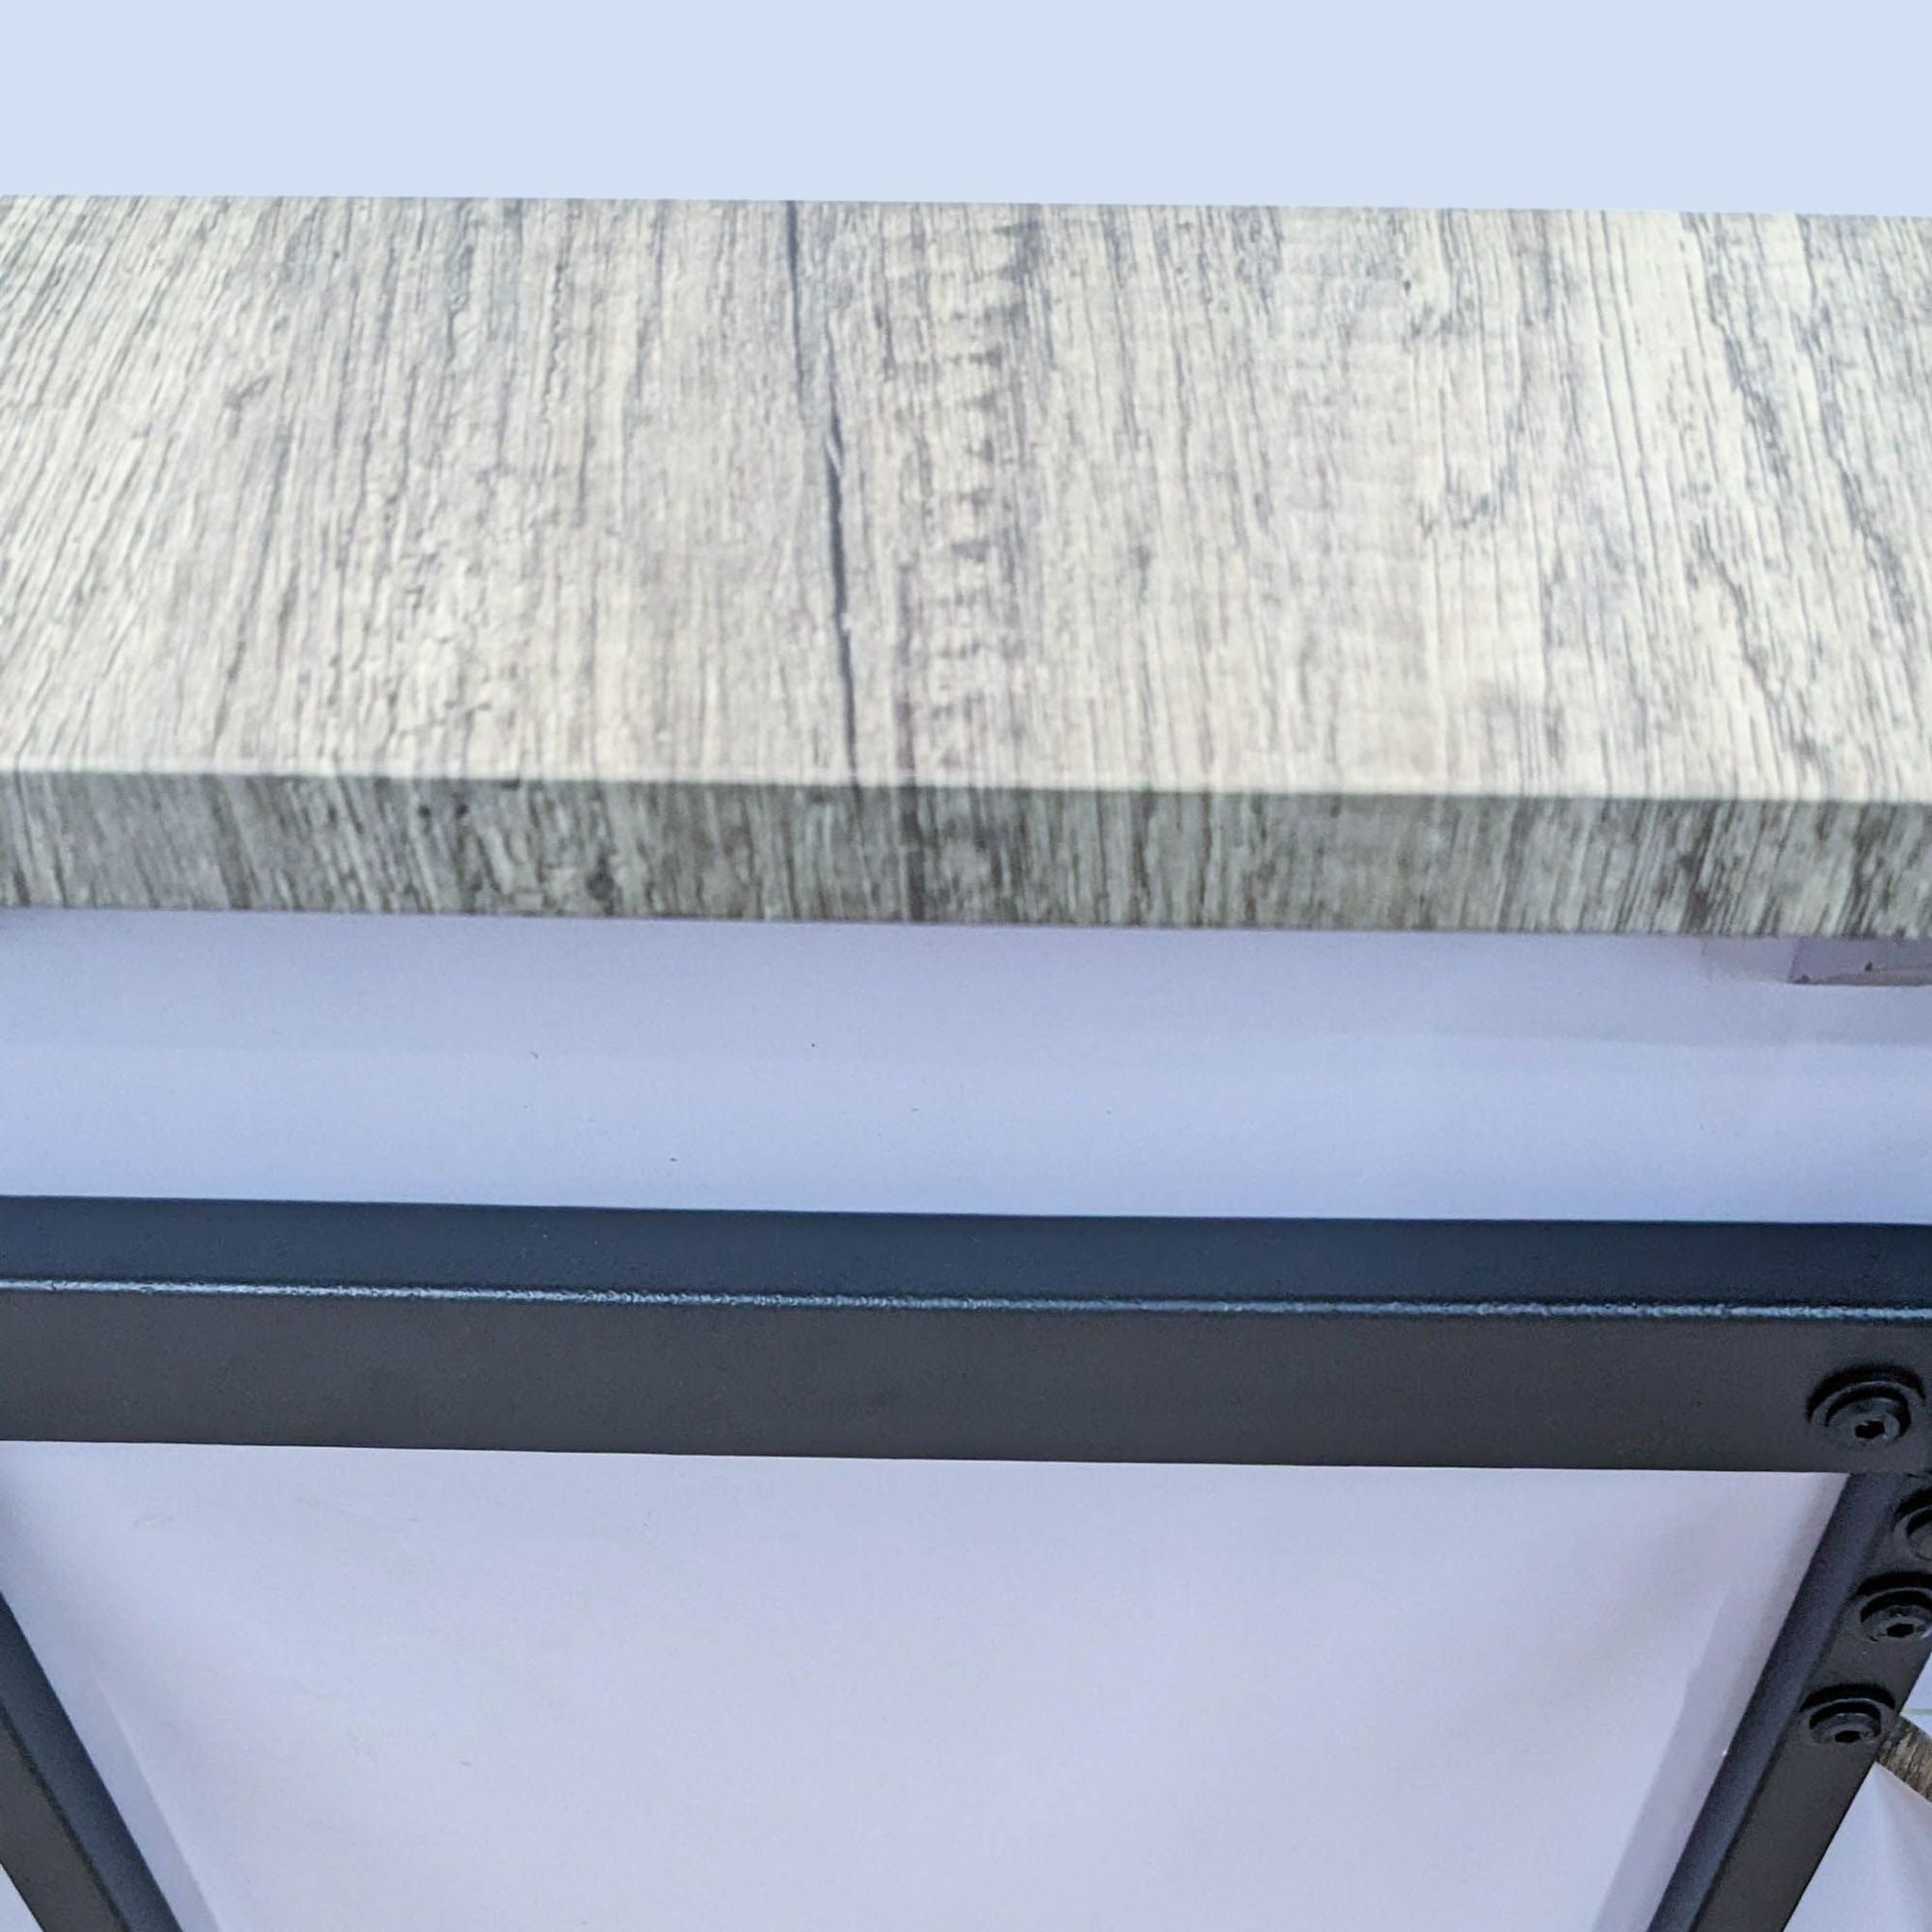 Reperch brand coffee table detail showing wooden top and metal frame construction.